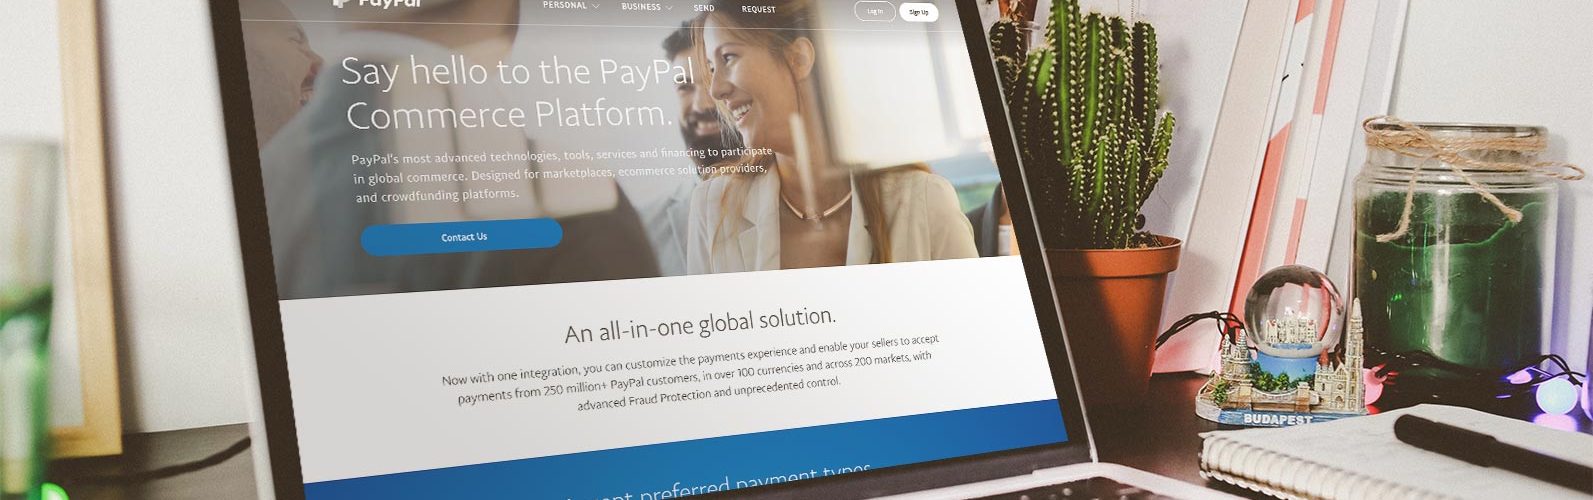 What is PayPal Commerce Platform?